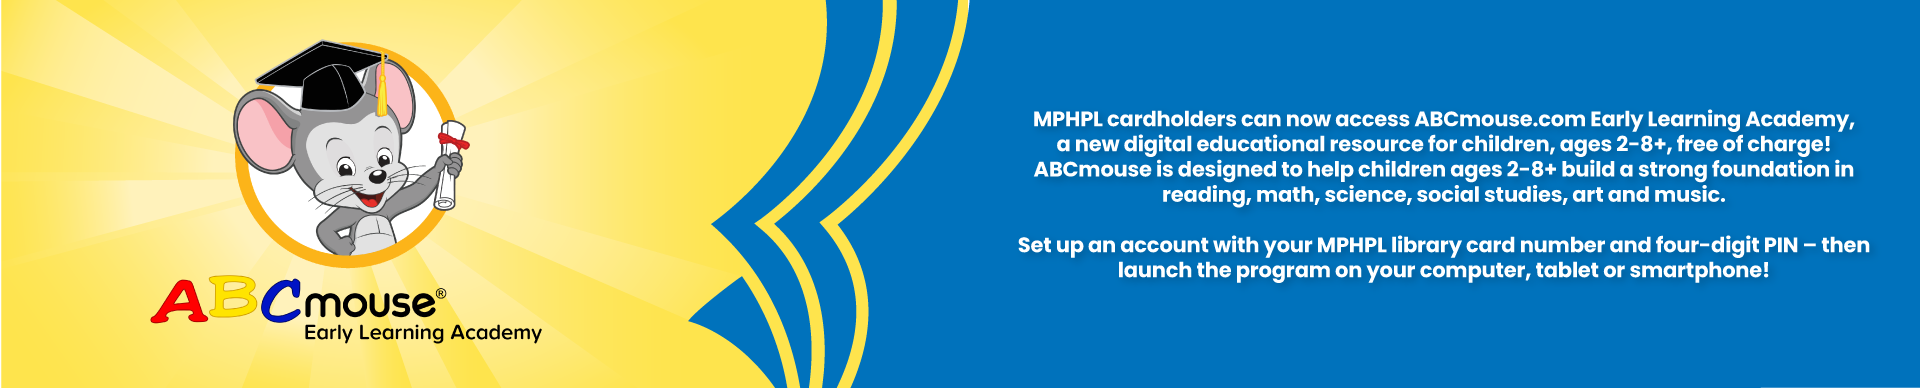 MPHPL cardholders can now access ABCmouse.com Early Learning Academy, a new digital educational resource for children, ages 2-8+, free of charge! ABCmouse is designed to help children ages 2-8+ build a strong foundation in reading, math, science, social studies, art and music.   Set up an account with your MPHPL library card number and four-digit PIN – then launch the program on your computer, tablet or smartphone! 